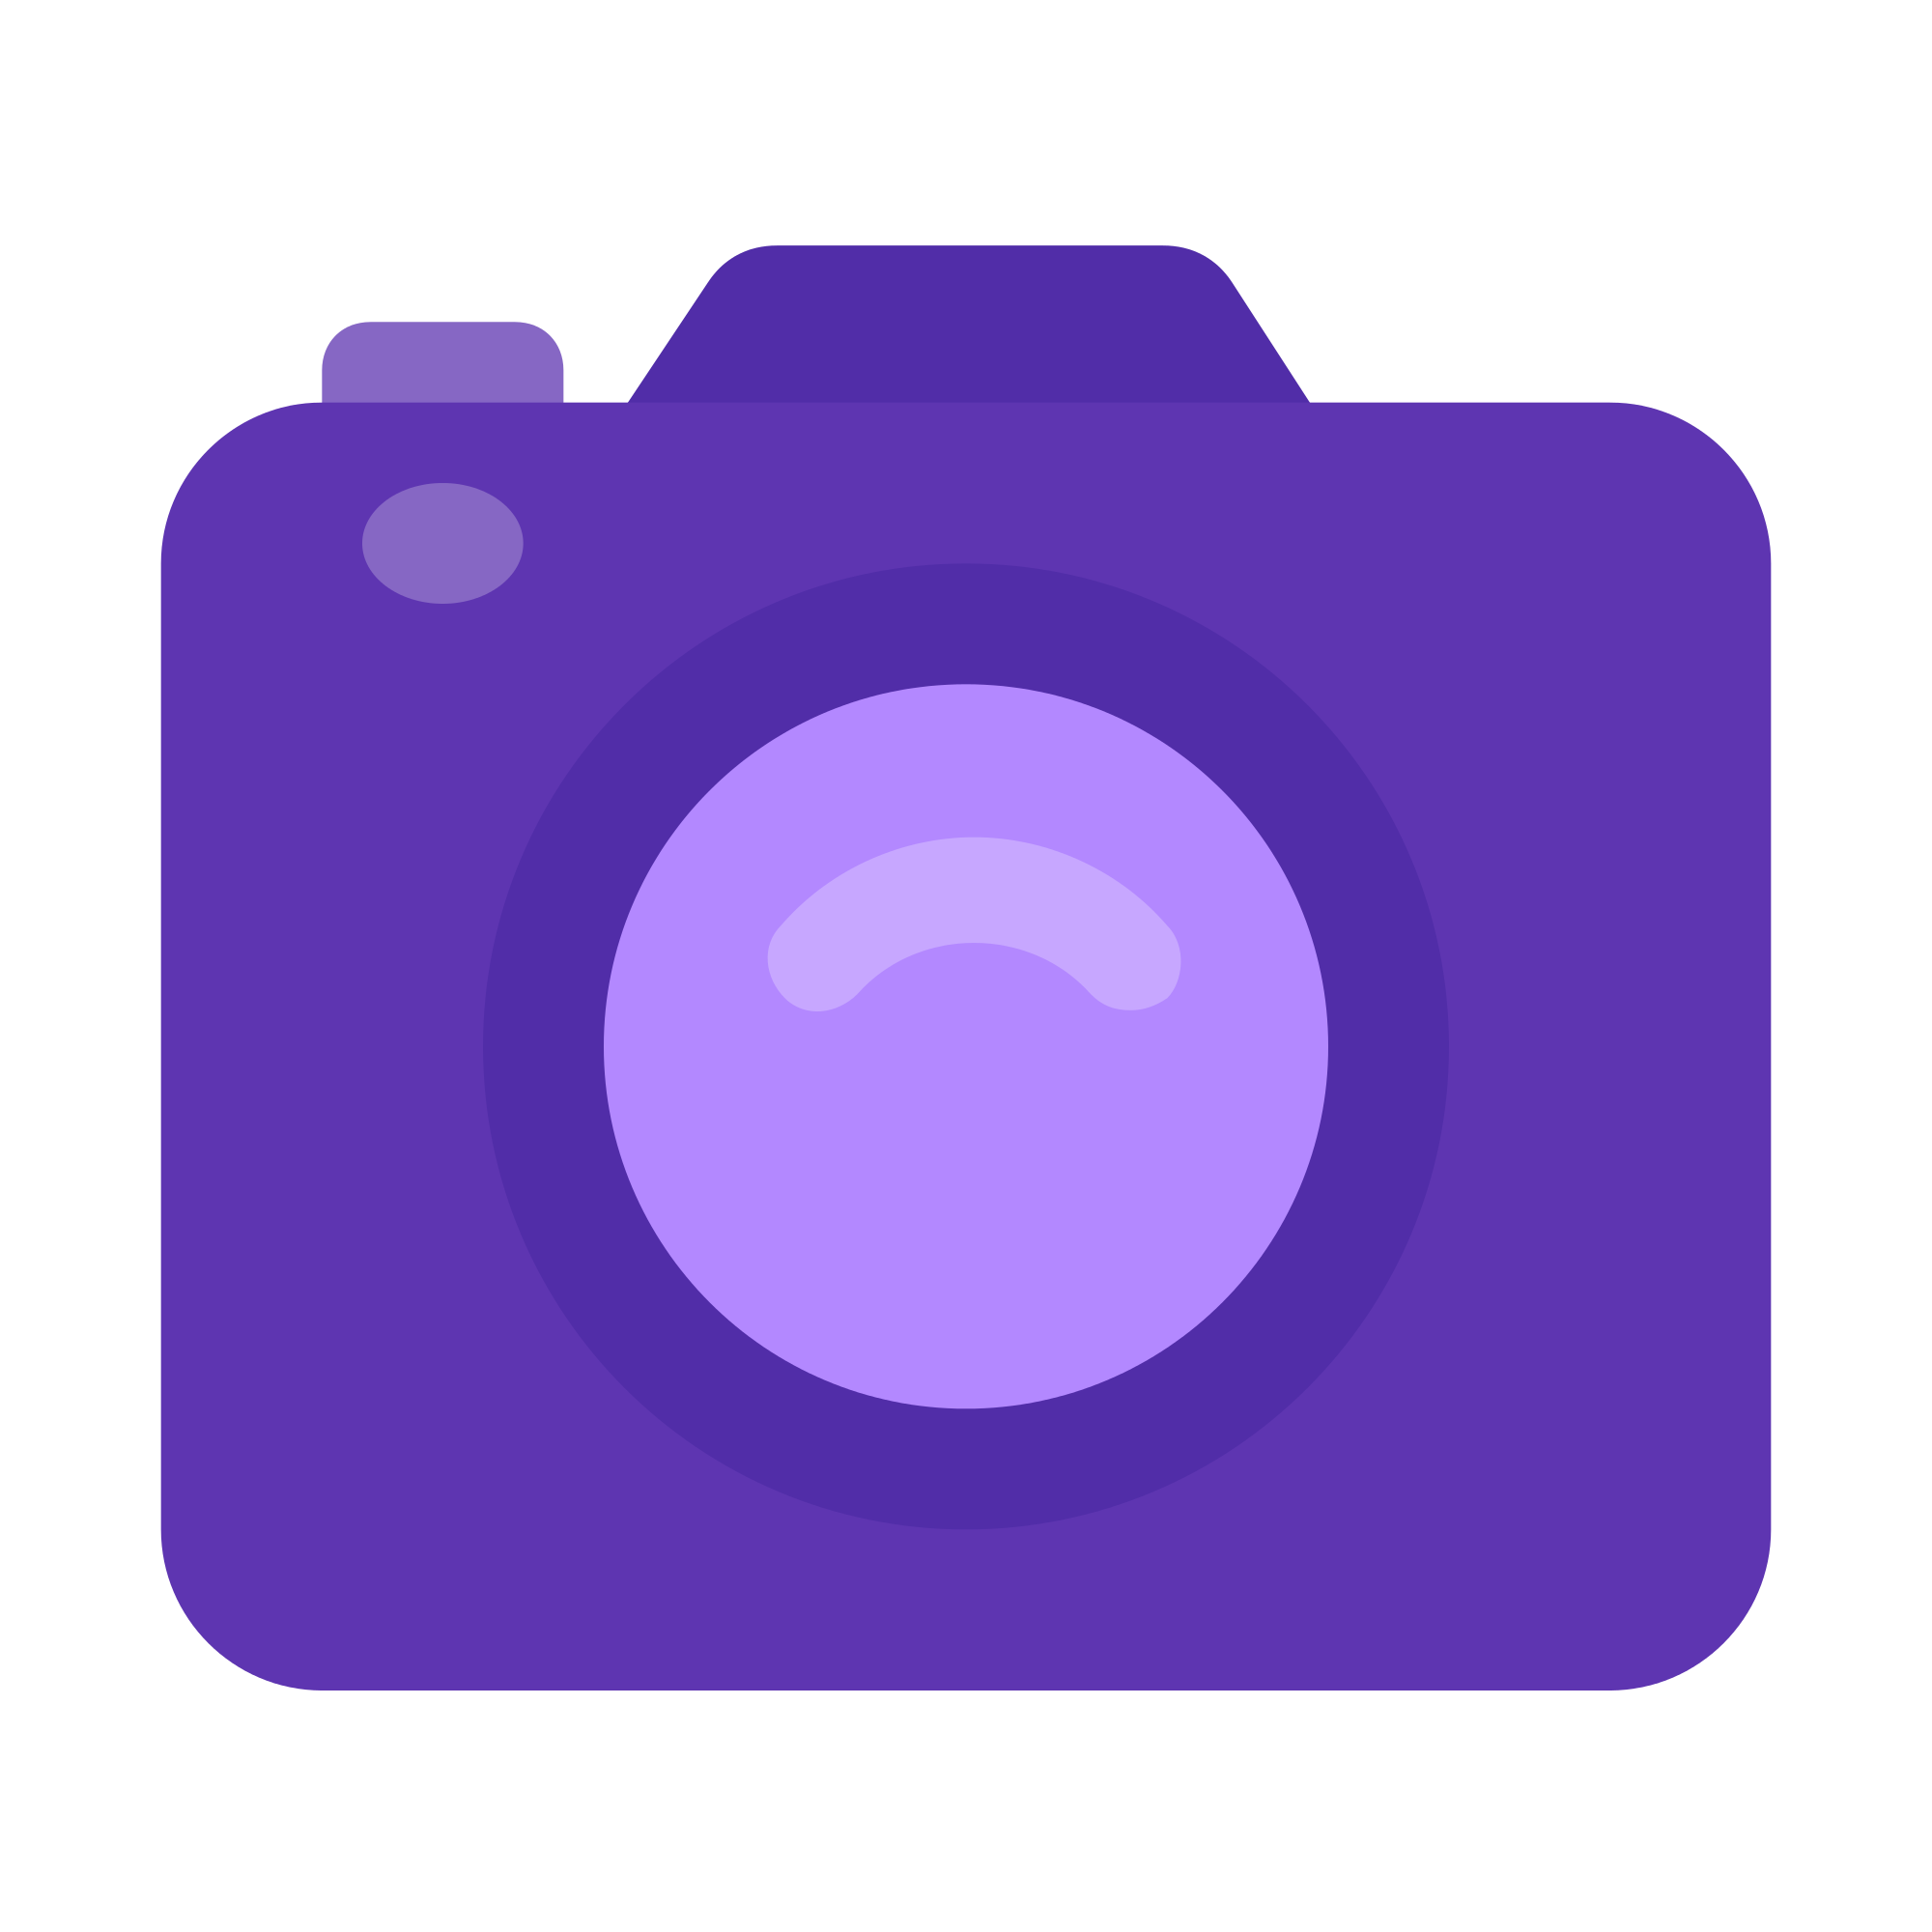 Photograph clipart purple camera. File icons flat svg